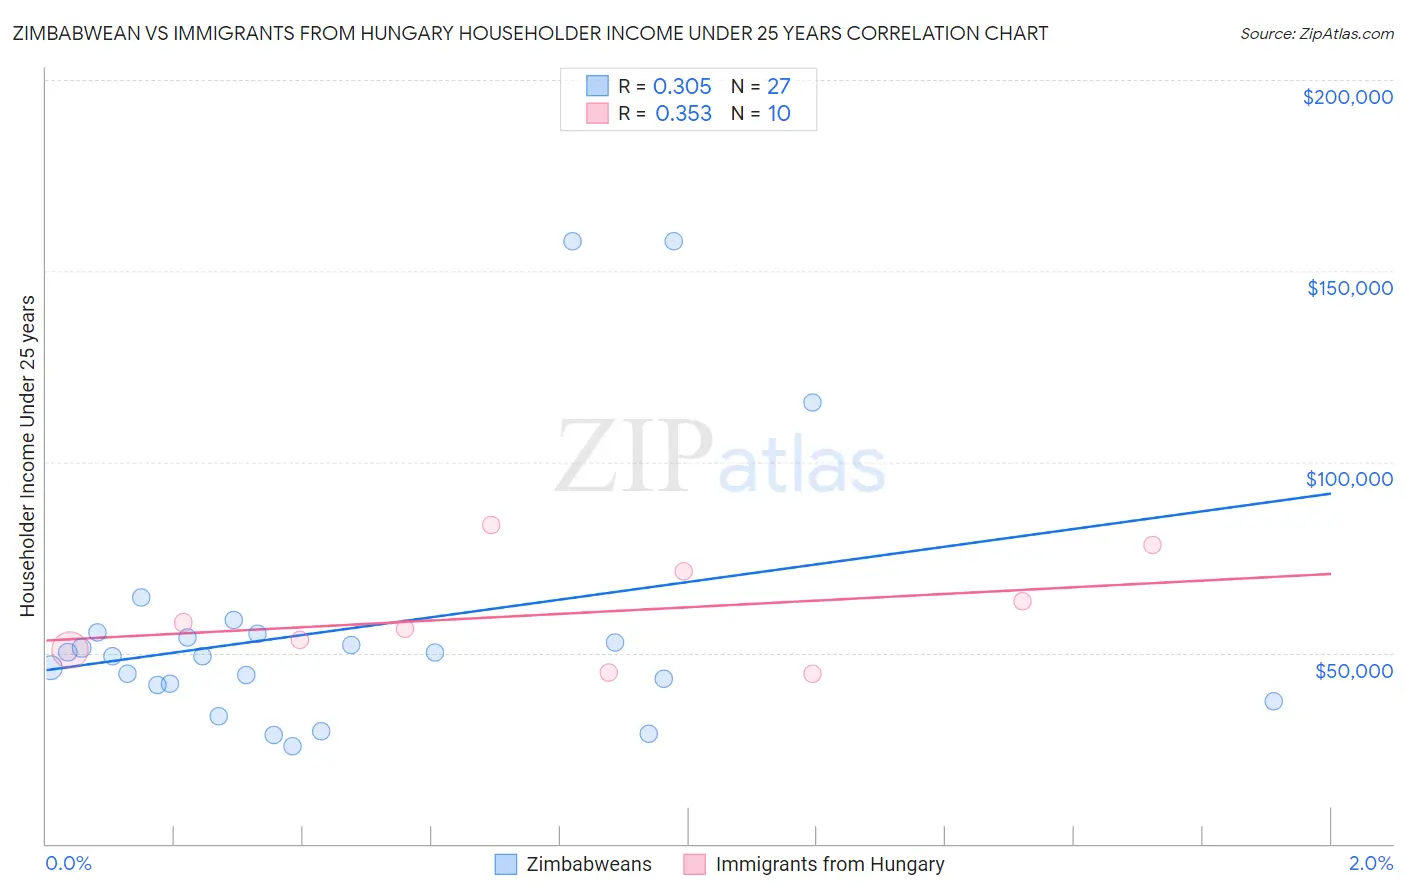 Zimbabwean vs Immigrants from Hungary Householder Income Under 25 years